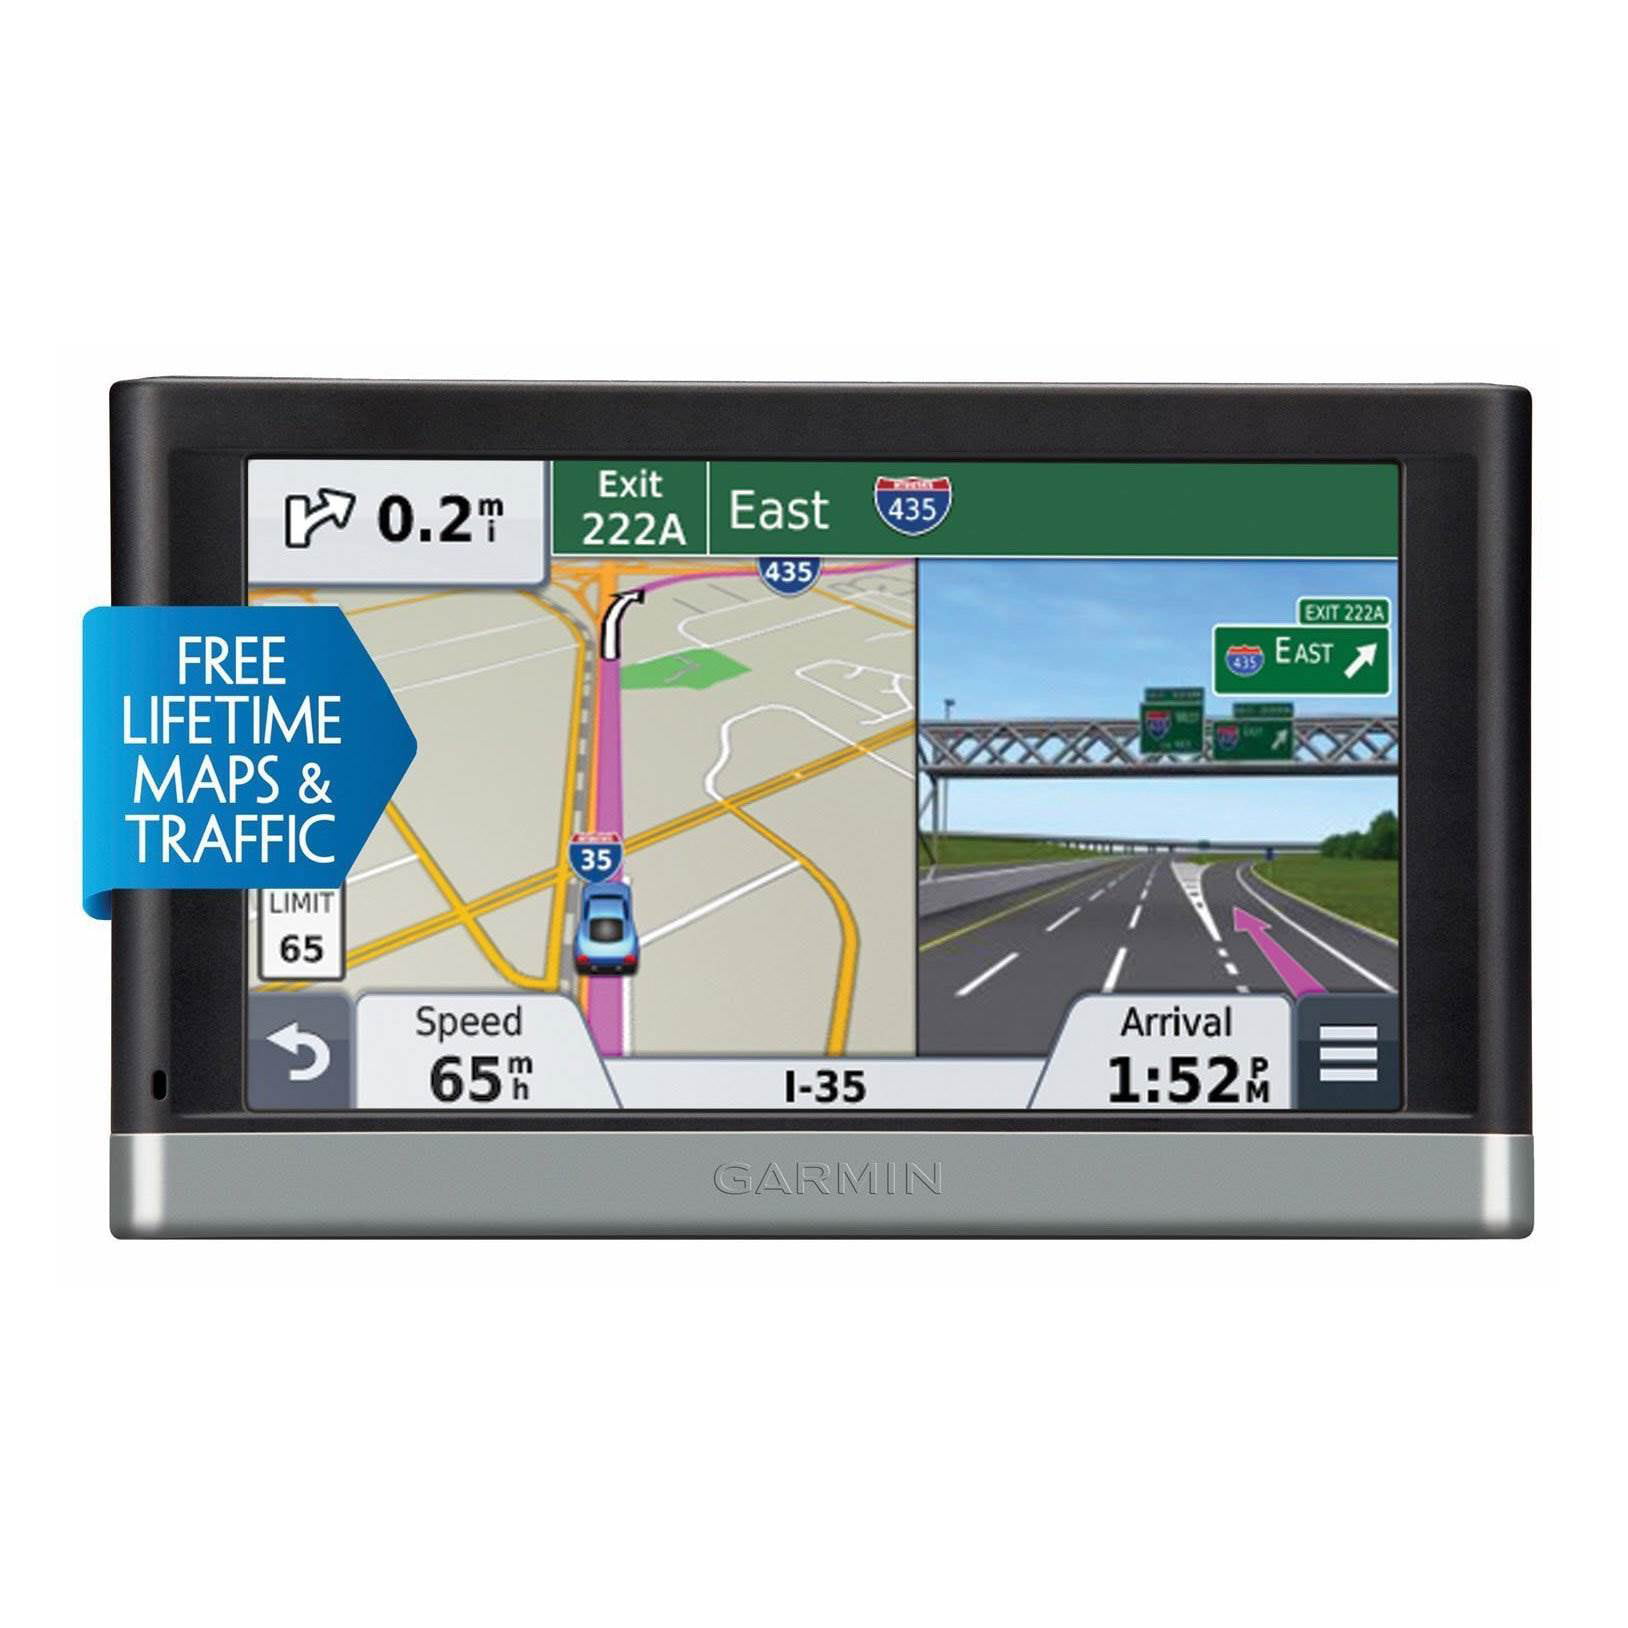 Garmin nüvi 2597LMT 5-Inch Portable Bluetooth Vehicle GPS with Lifetime Maps and Traffic Discontinued by Manufacturer 